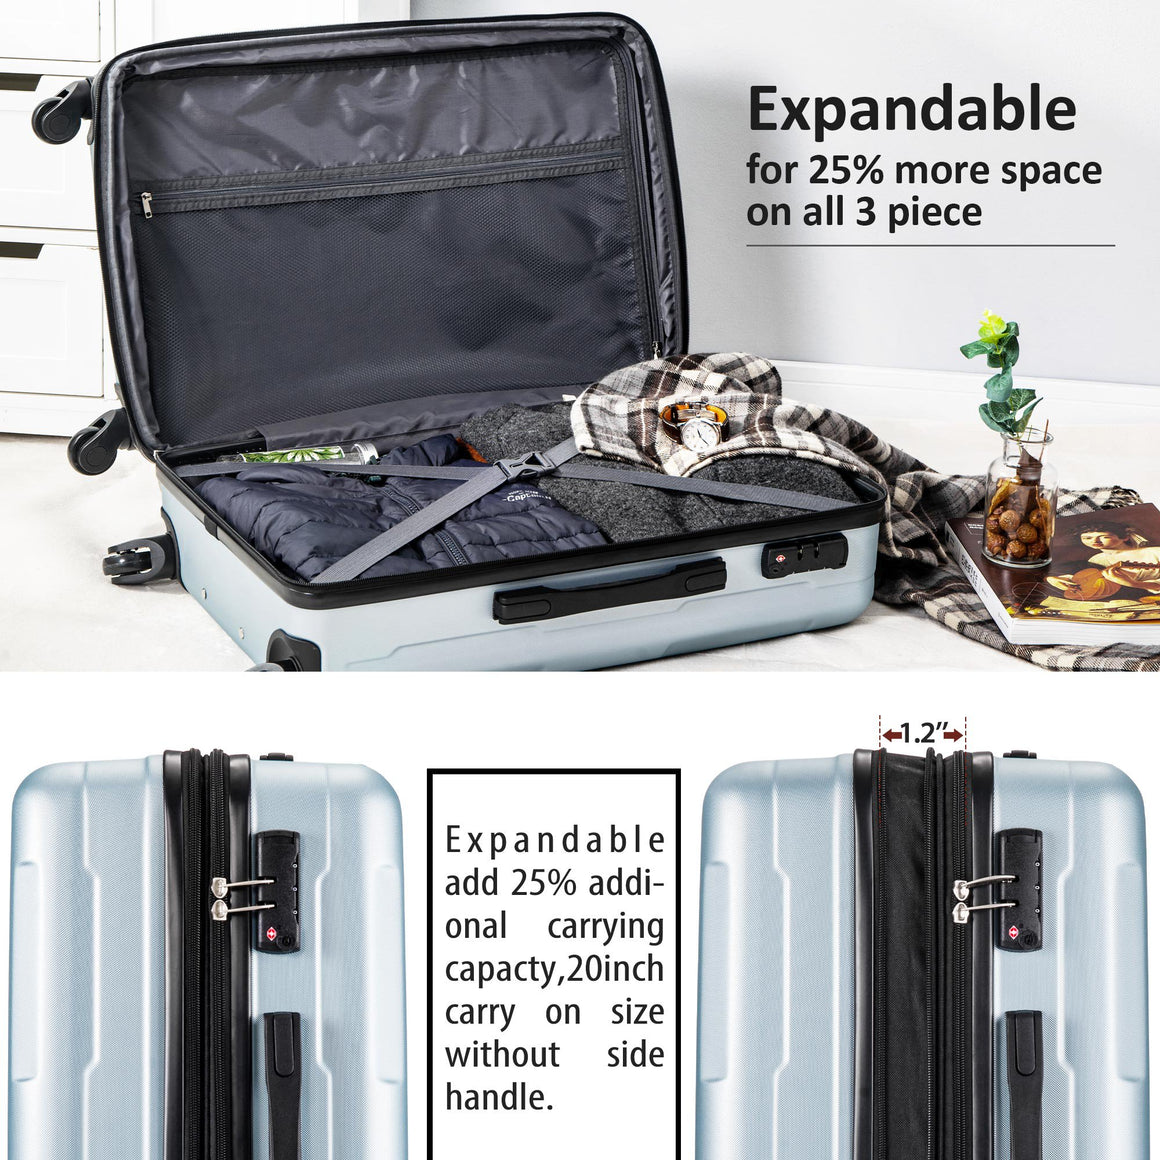 3 Piece Luggage Travel Set, 20" 24" 28" Carry on Luggage with Spinner Wheels, TSA Lock, Lightweight Hard Case Luggage Travel Suitcase for Business Trip Holiday Travel Cruise